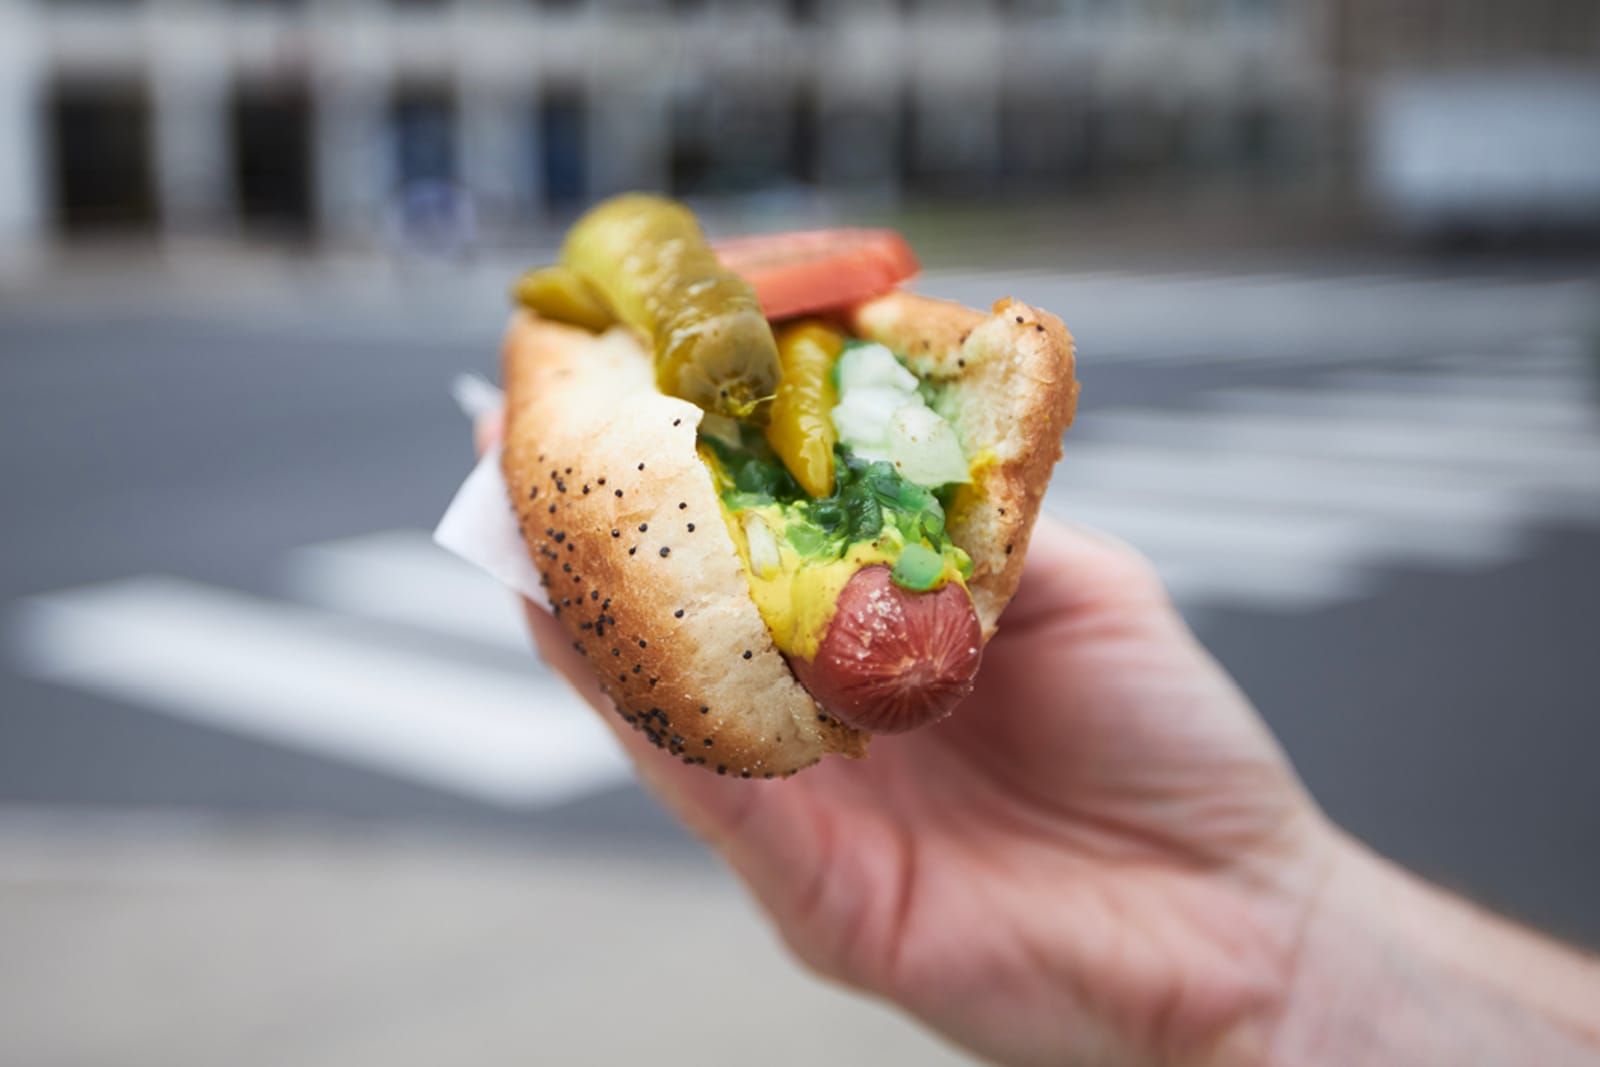 A person holding a Chicago-style hot dog